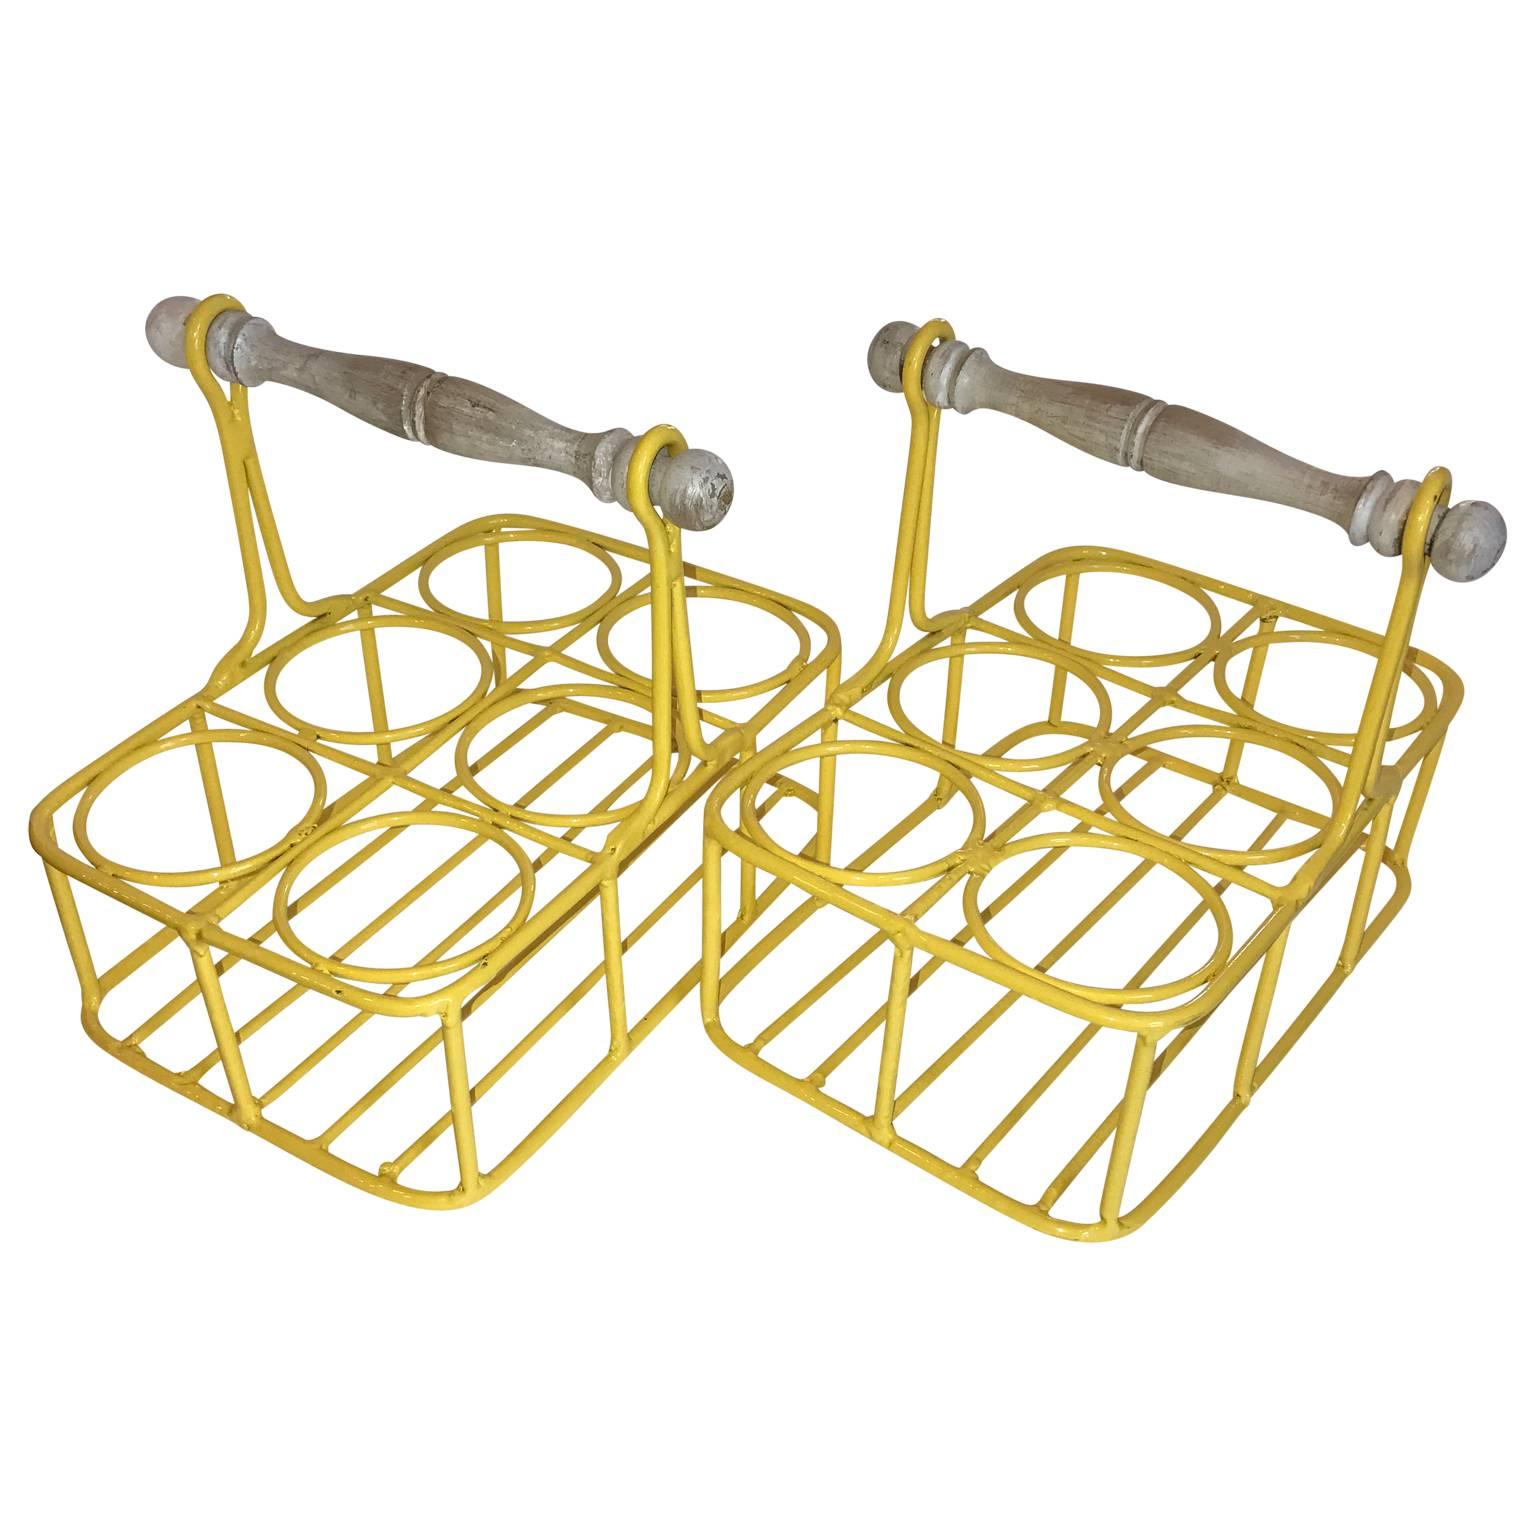 Set of two wine racks or planters in bright sunshine yellow.